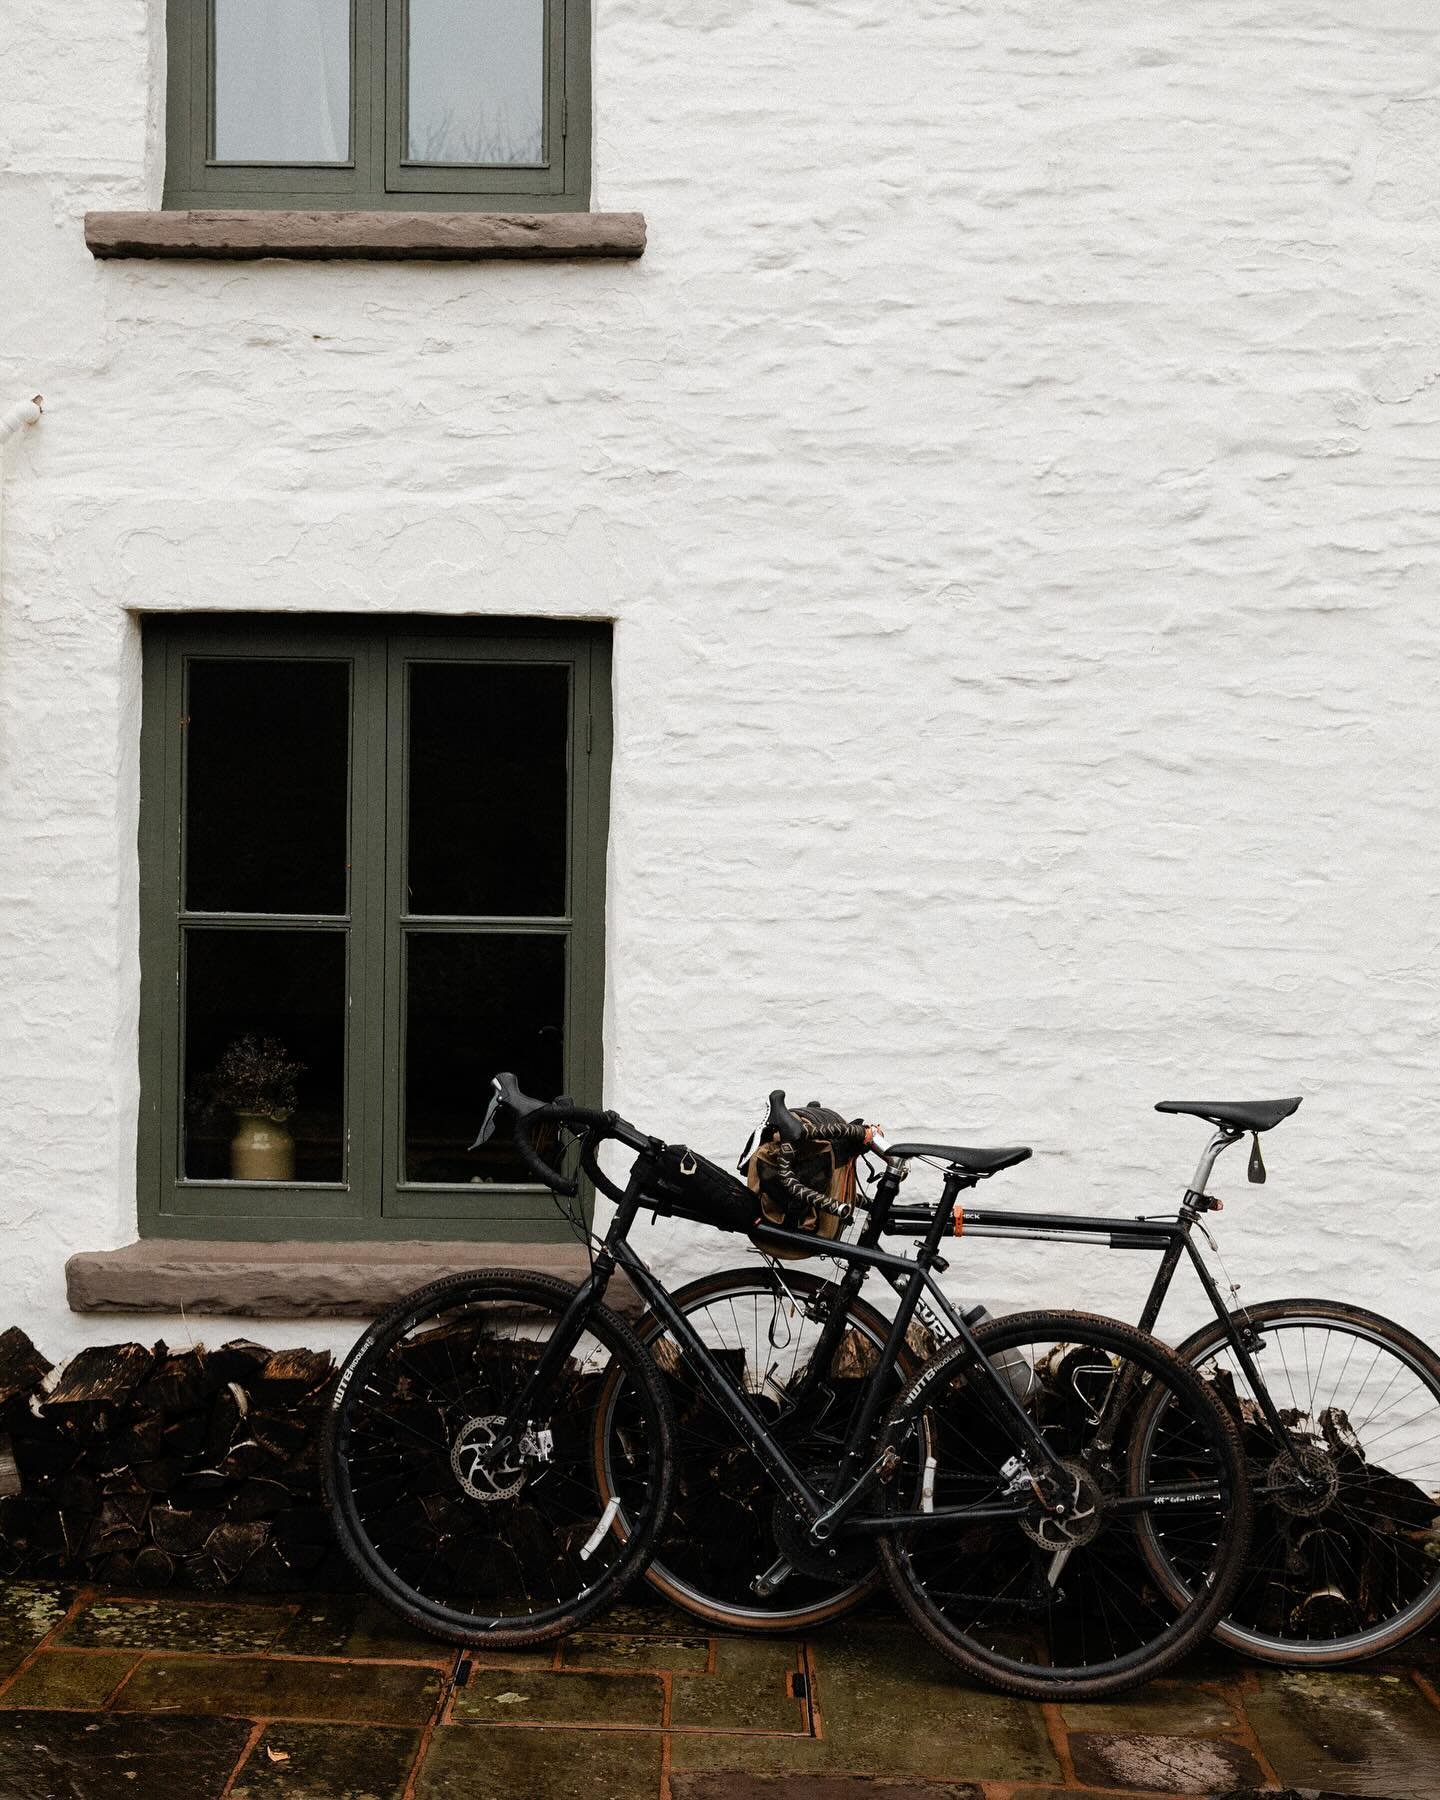 The Black Mountains is a Cyclists paradise, from epic road climbs like gospel pass to @dirtfarmwales for those with a thirst for adrenaline, we are truly spoilt for choice. 

The beer always tastes better after a ride so oil up those chains, grab you